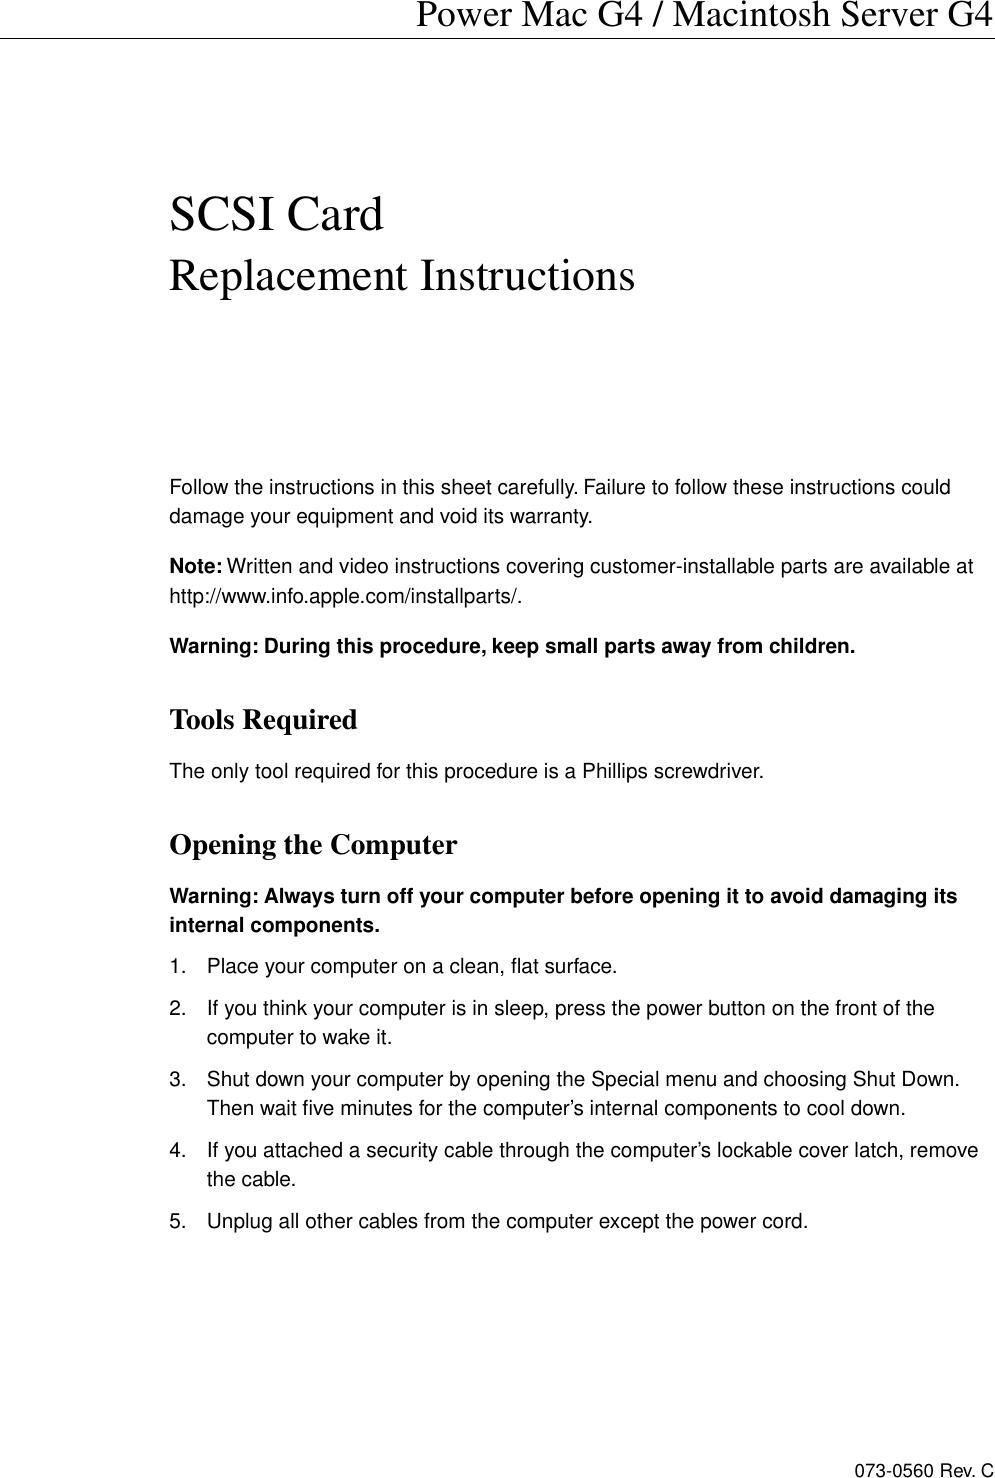 Page 1 of 4 - Apple Power Mac G4 (Digital Audio) User Manual And Macintosh Server - SCSI Card Replacement Instructions G4mdd-scsicard